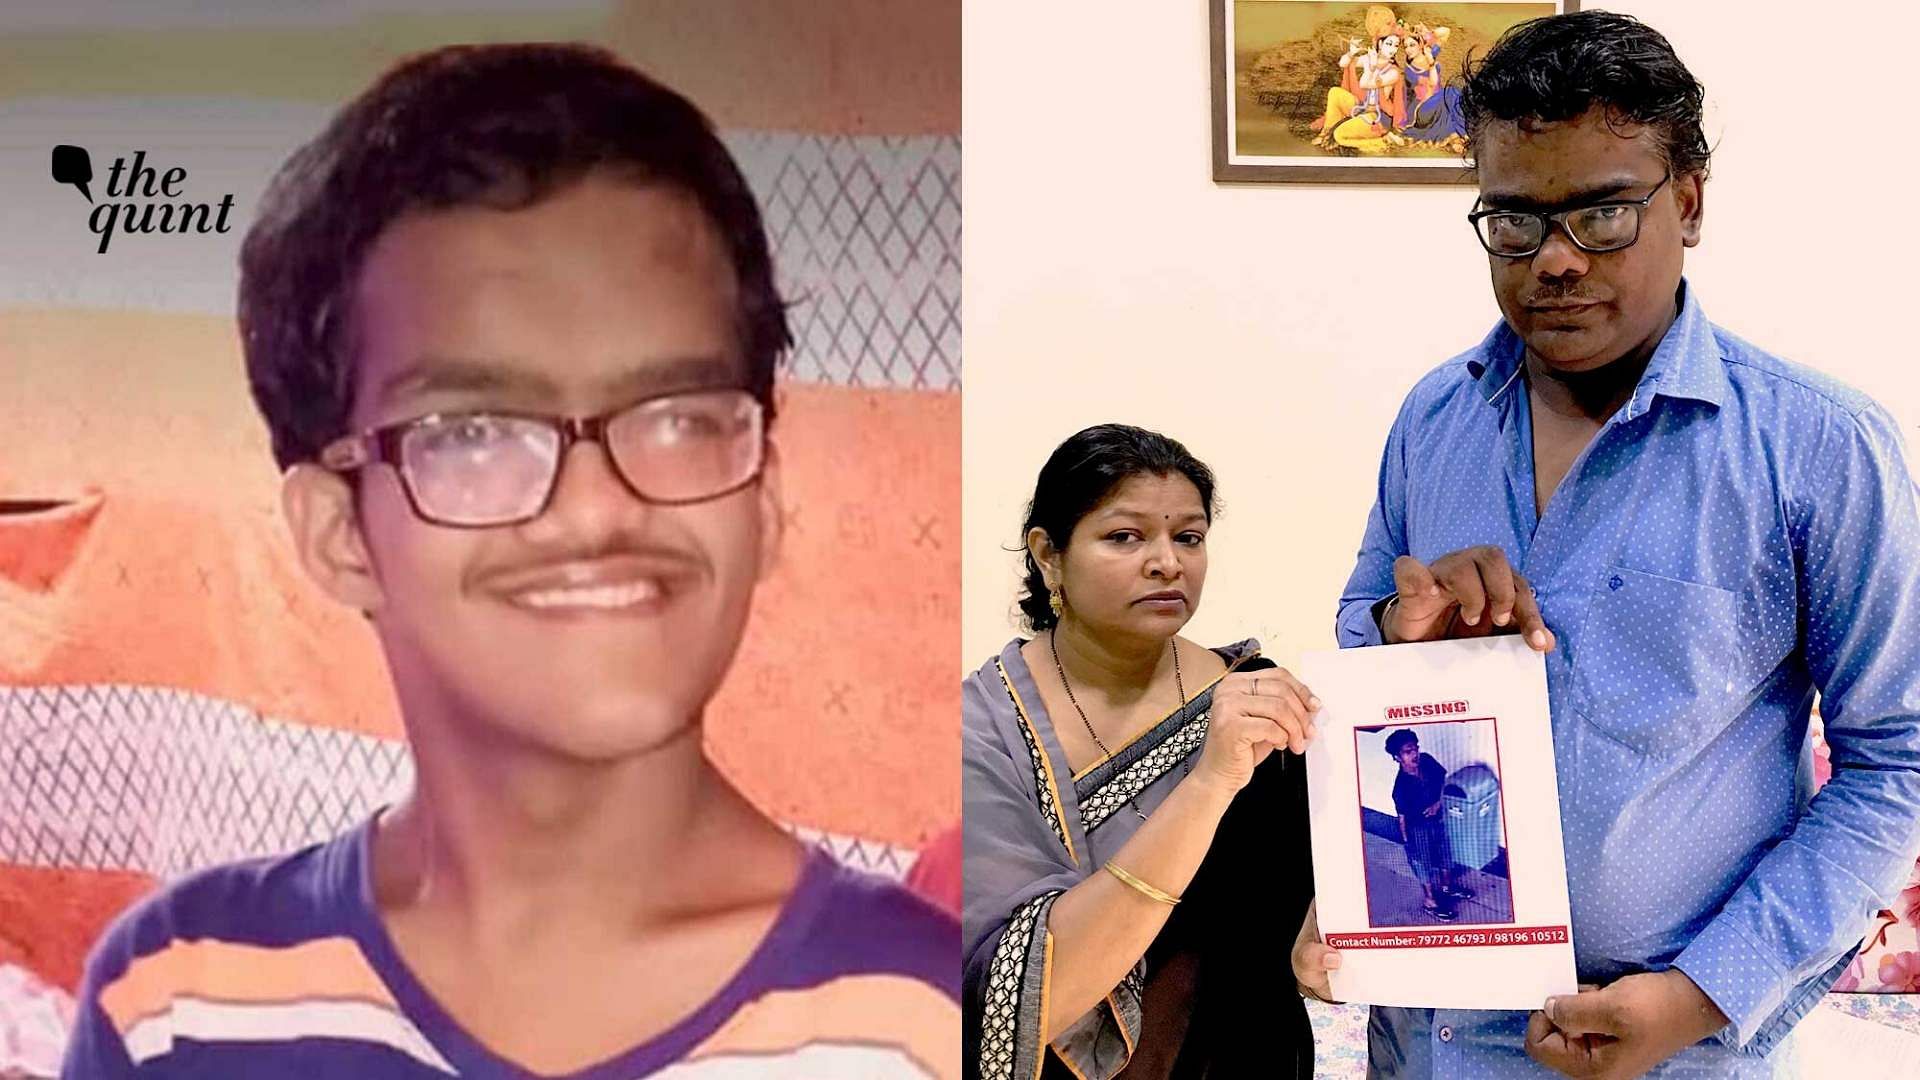 Tarun Gupta (left); his parents hold a poster of him (right).